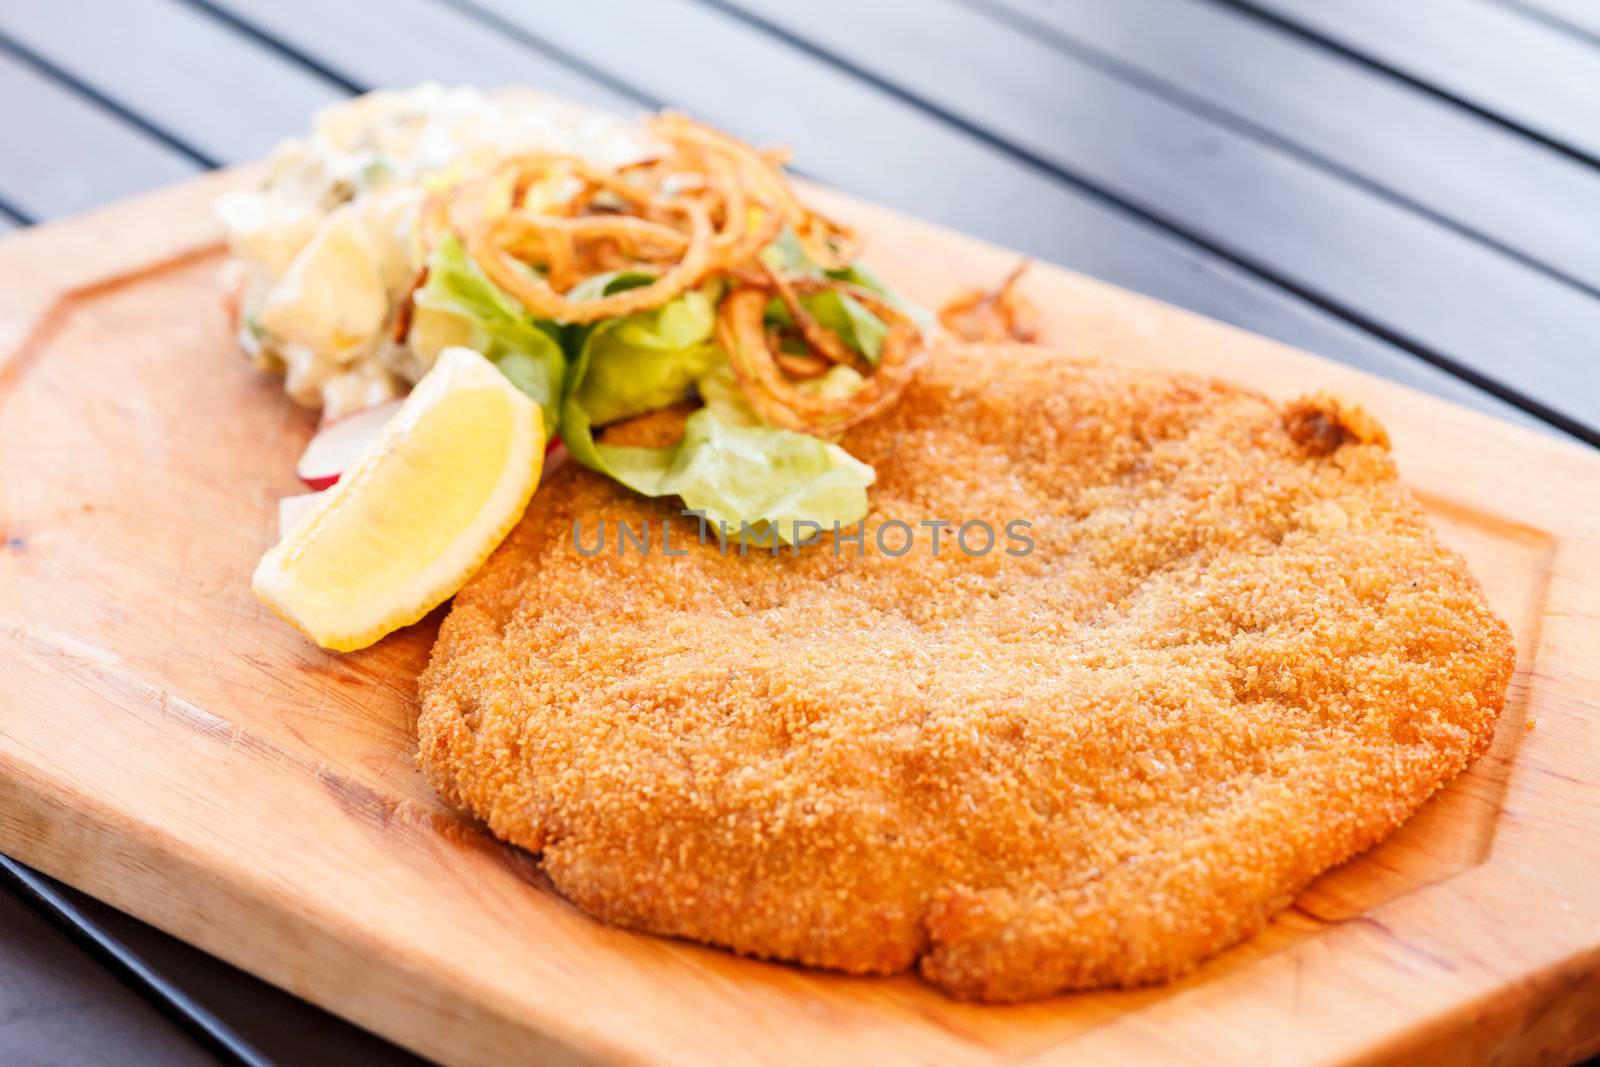 Schnitzel with salad by shebeko